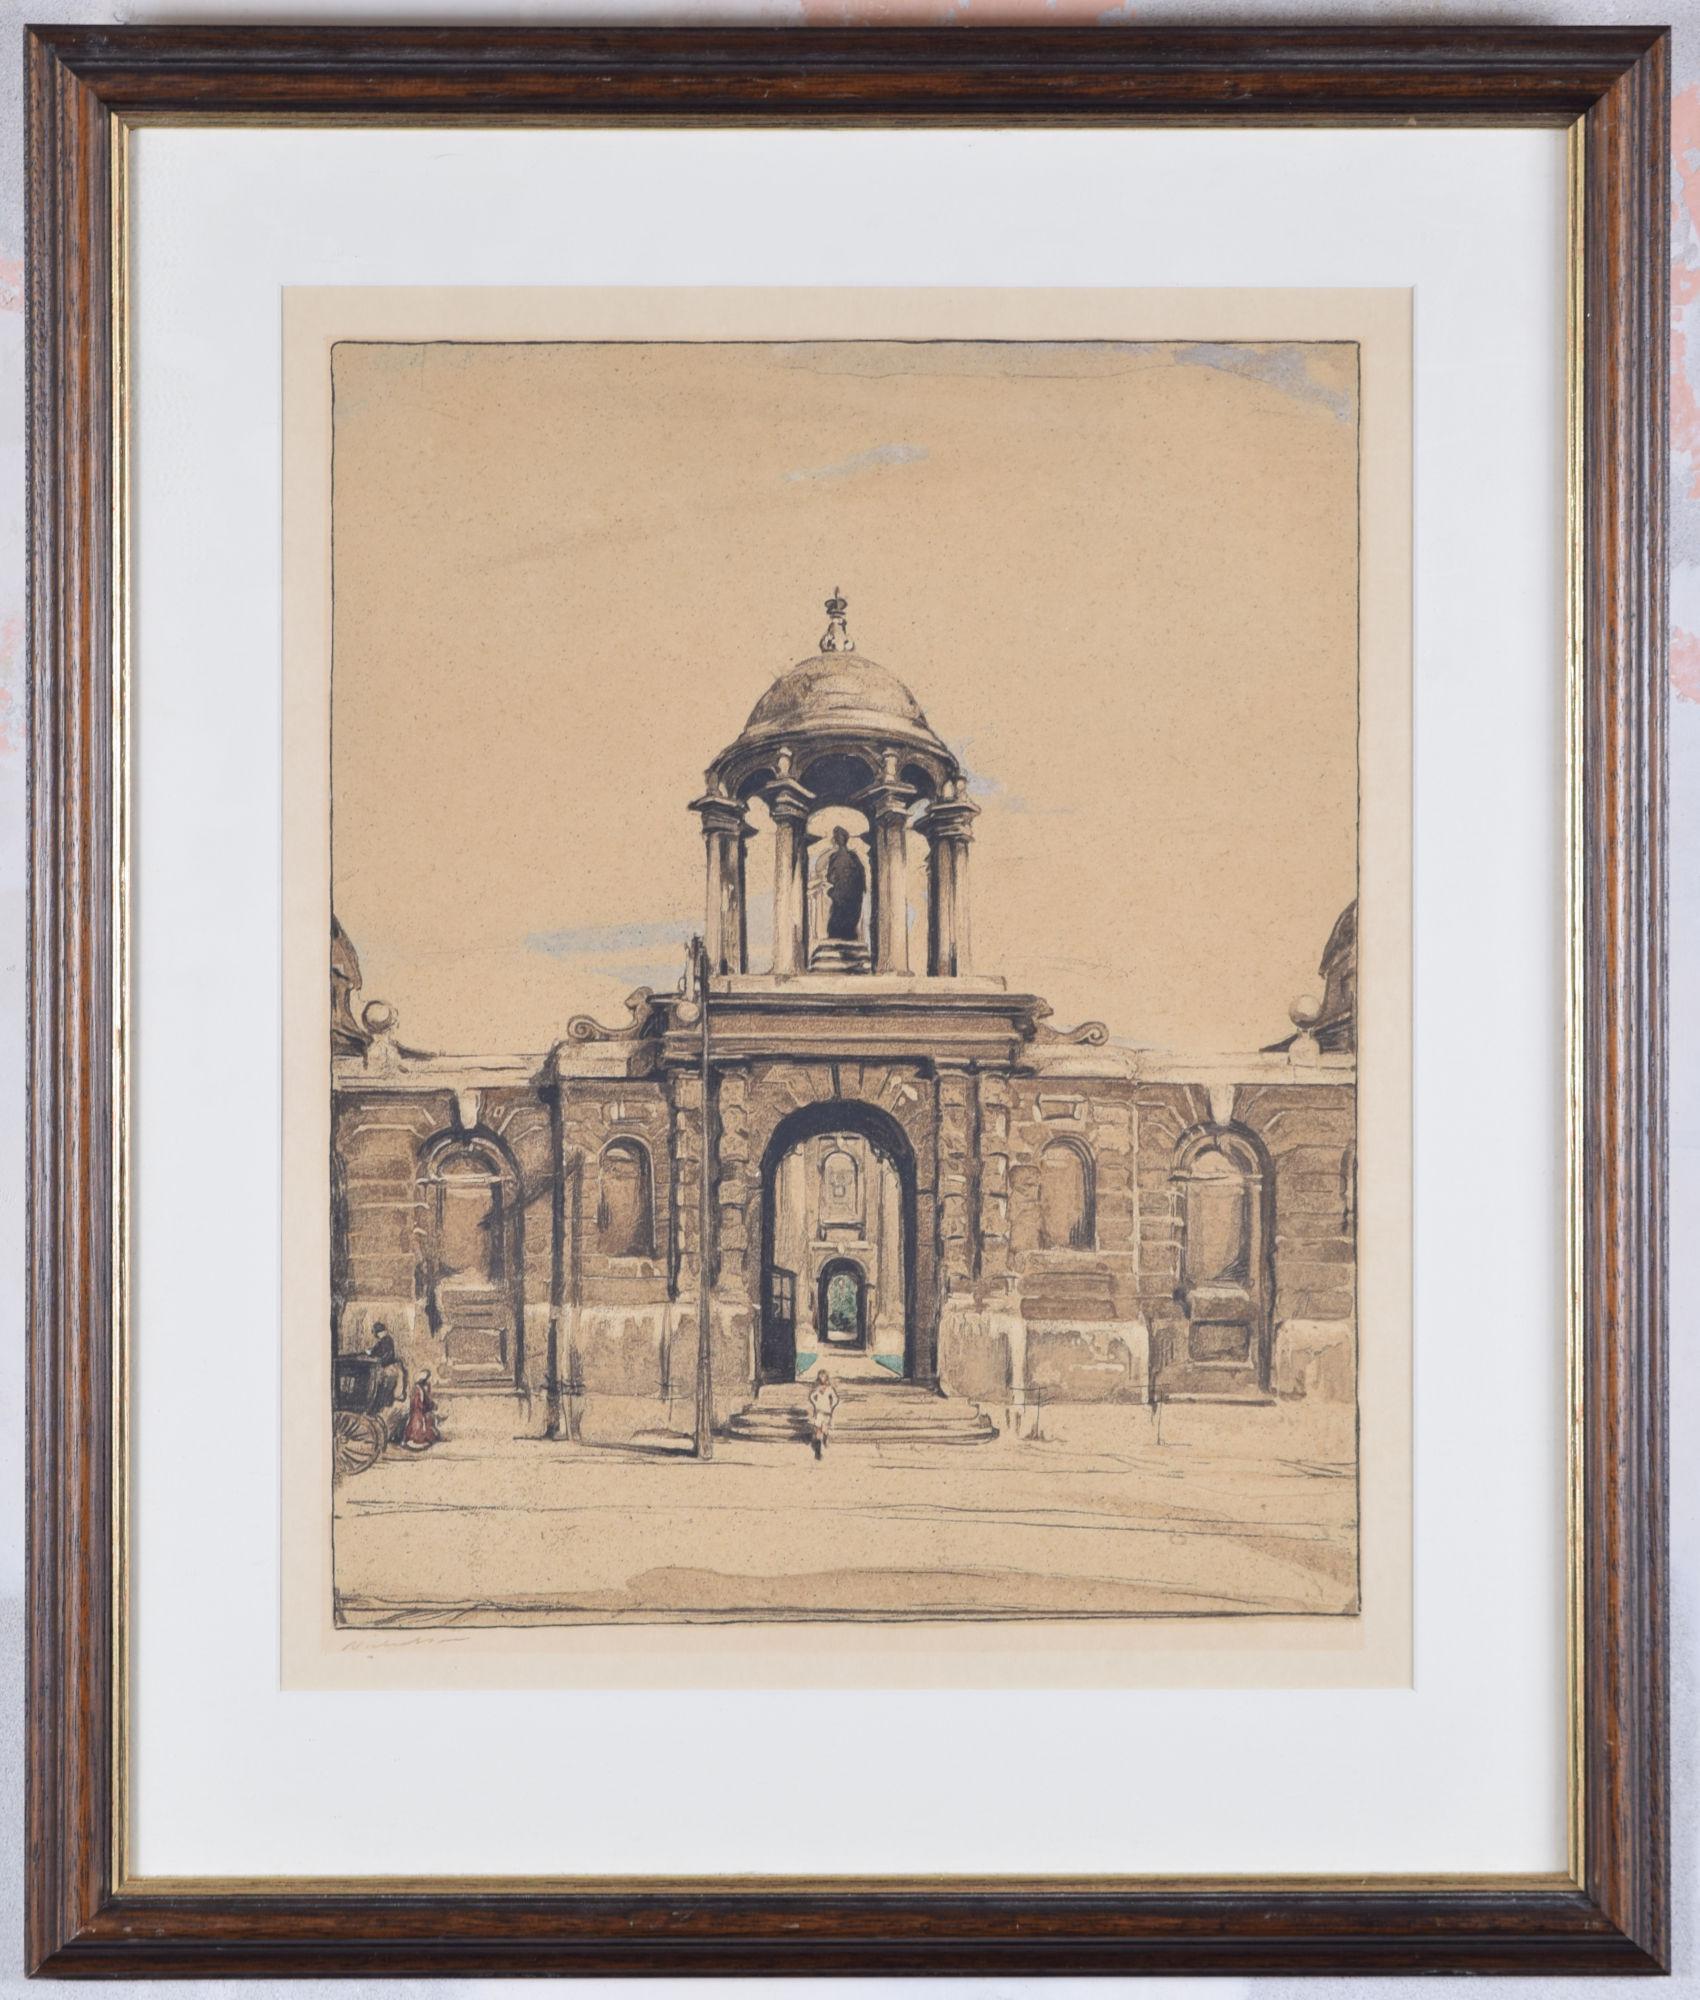 To see our other views of Oxford and Cambridge, scroll down to "More from this Seller" and below it click on "See all from this Seller" - or send us a message if you cannot find the view you want.

William Nicholson (1872 - 1949)
Queen's College,